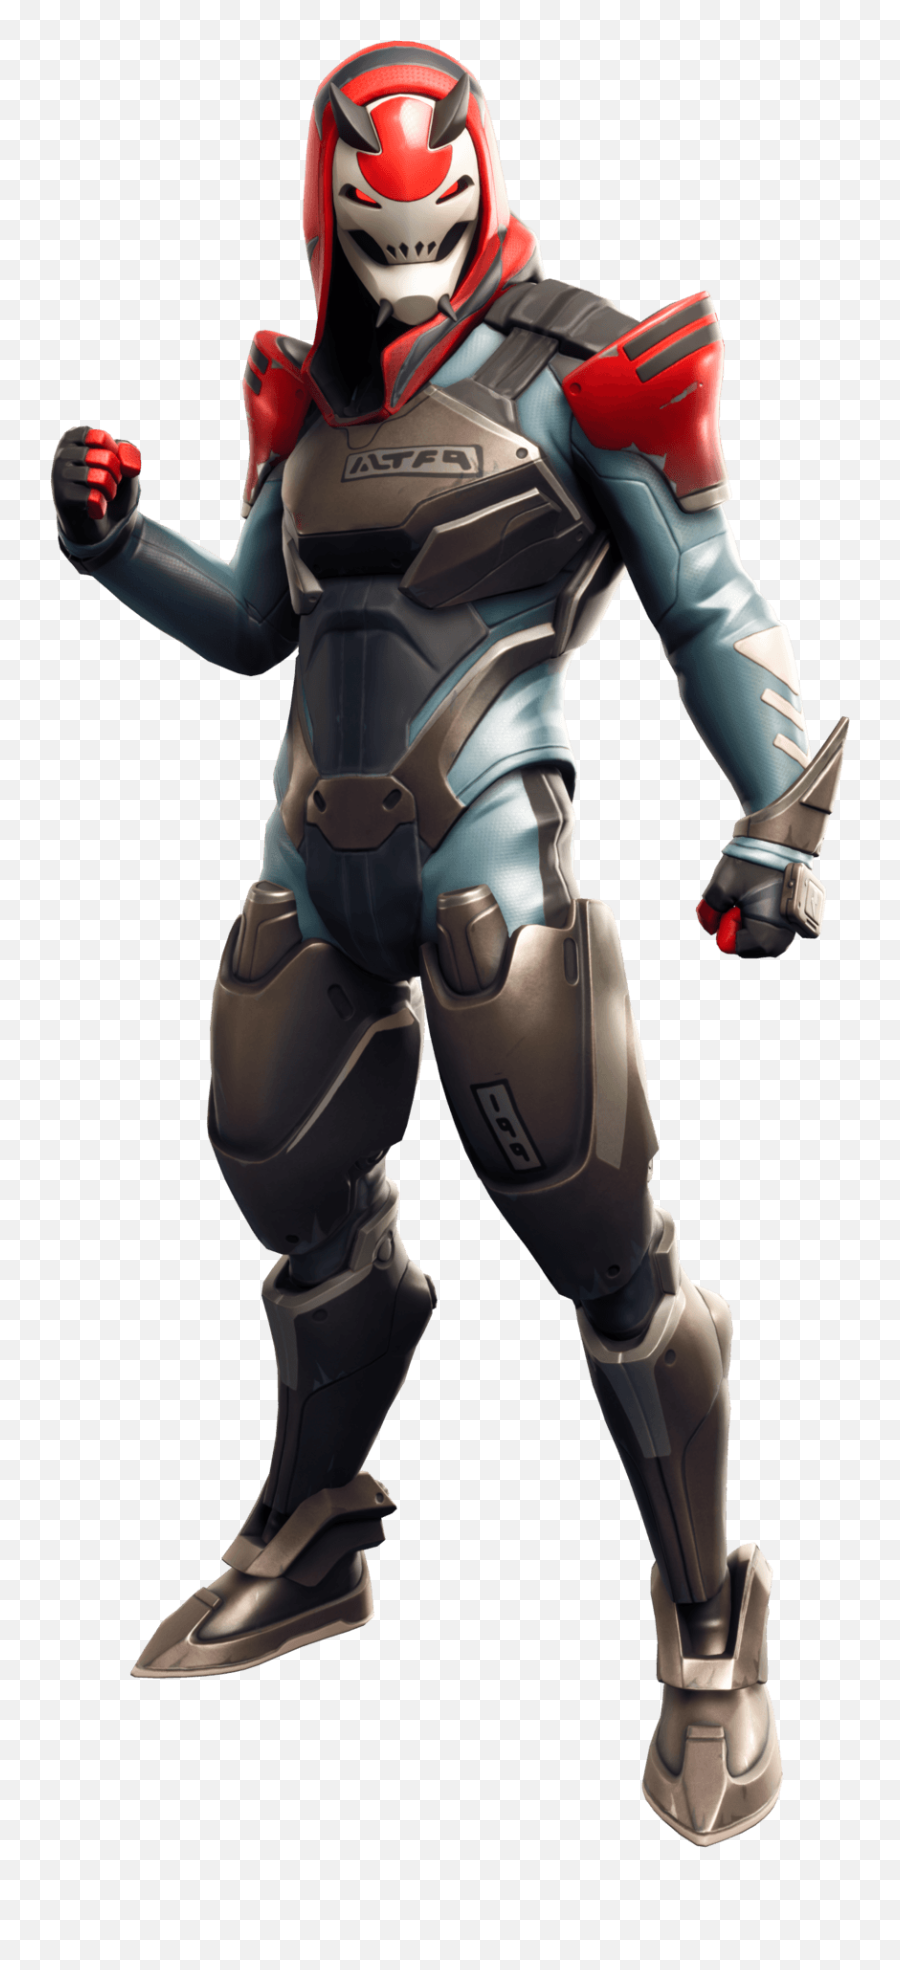 Fortnite Vendetta Skin - Outfit Png Images Pro Game Guides Vendetta Fortnite Skin,Fortnight Png